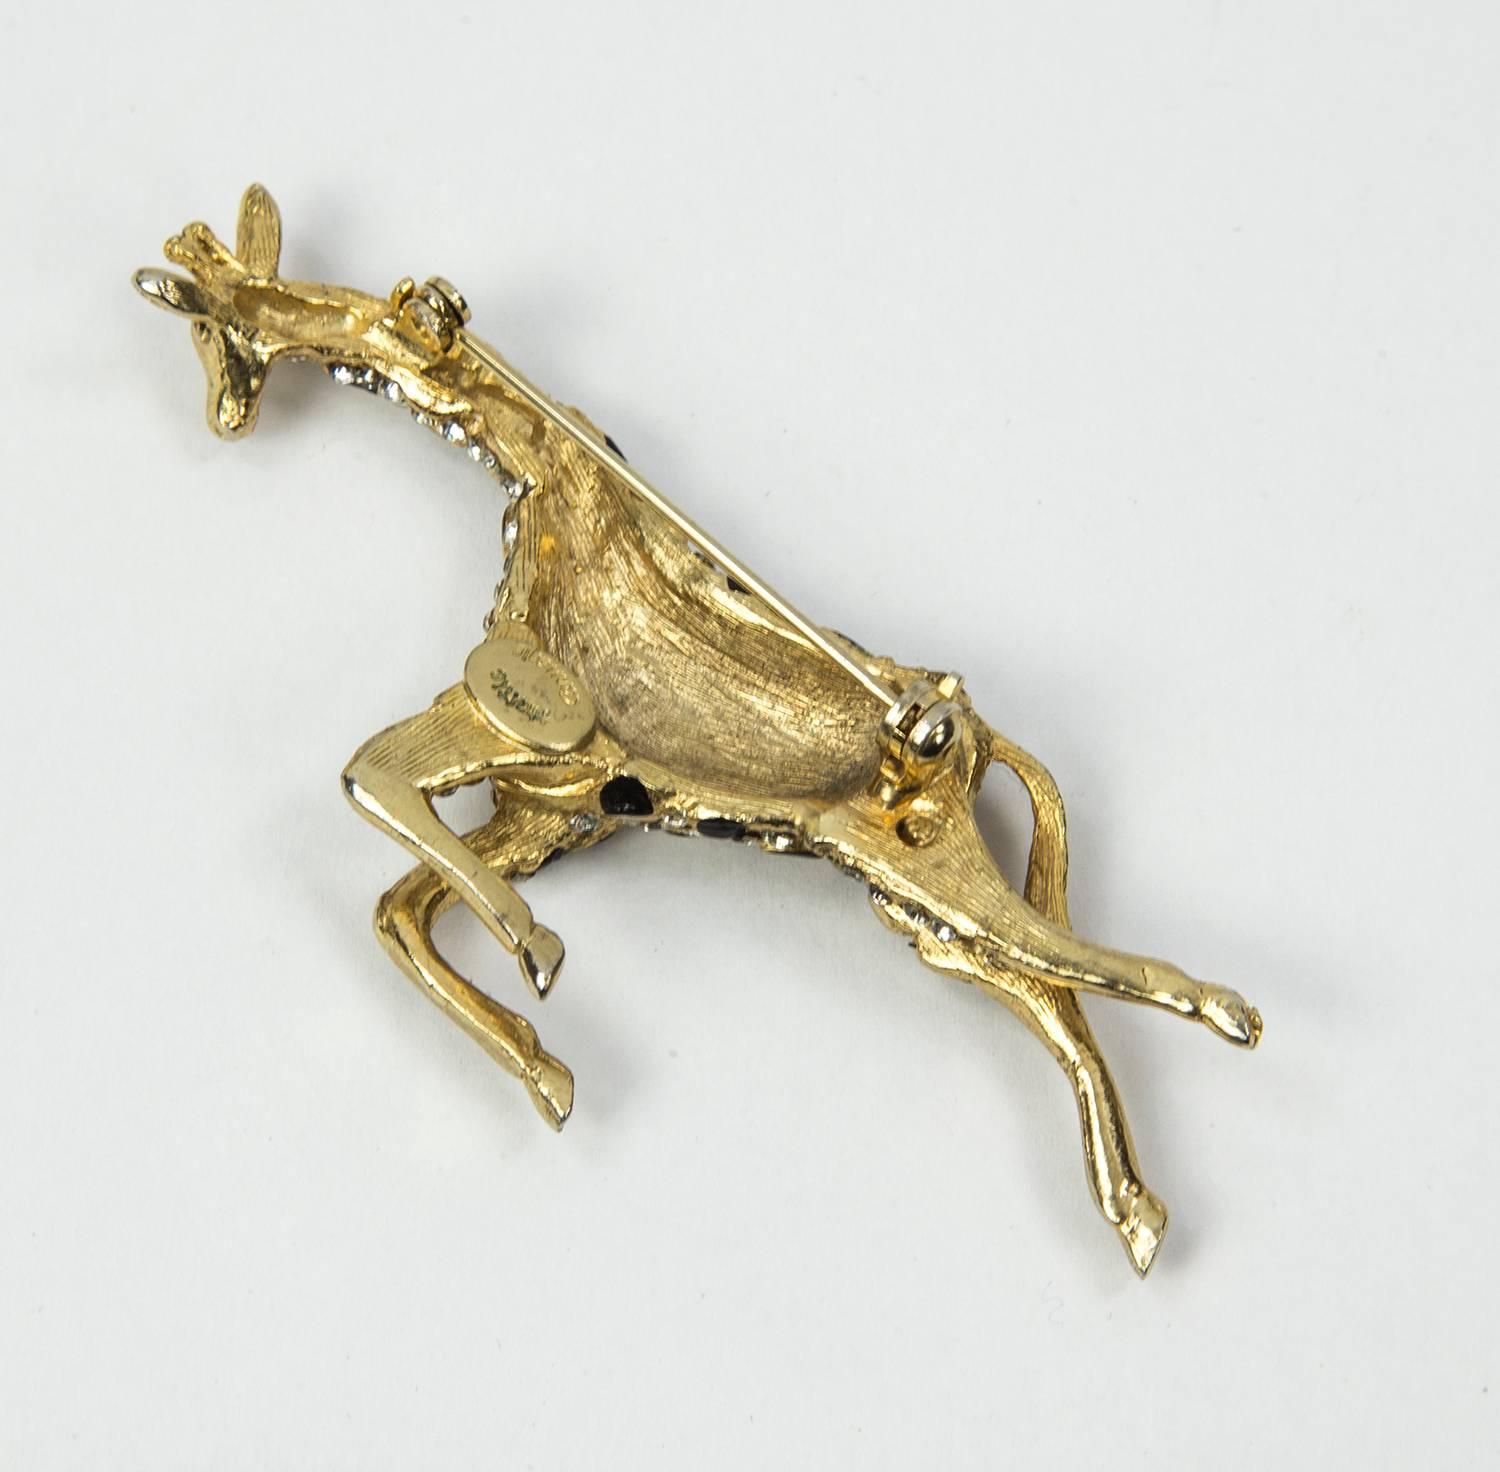 With her rhinestones flashing in the sun, this delightful giraffe is running for her life! Or so it would appear by her mad-cap running style. All 4 legs in motion, tail and head are all rendered in polished gold tone, while her body is done in